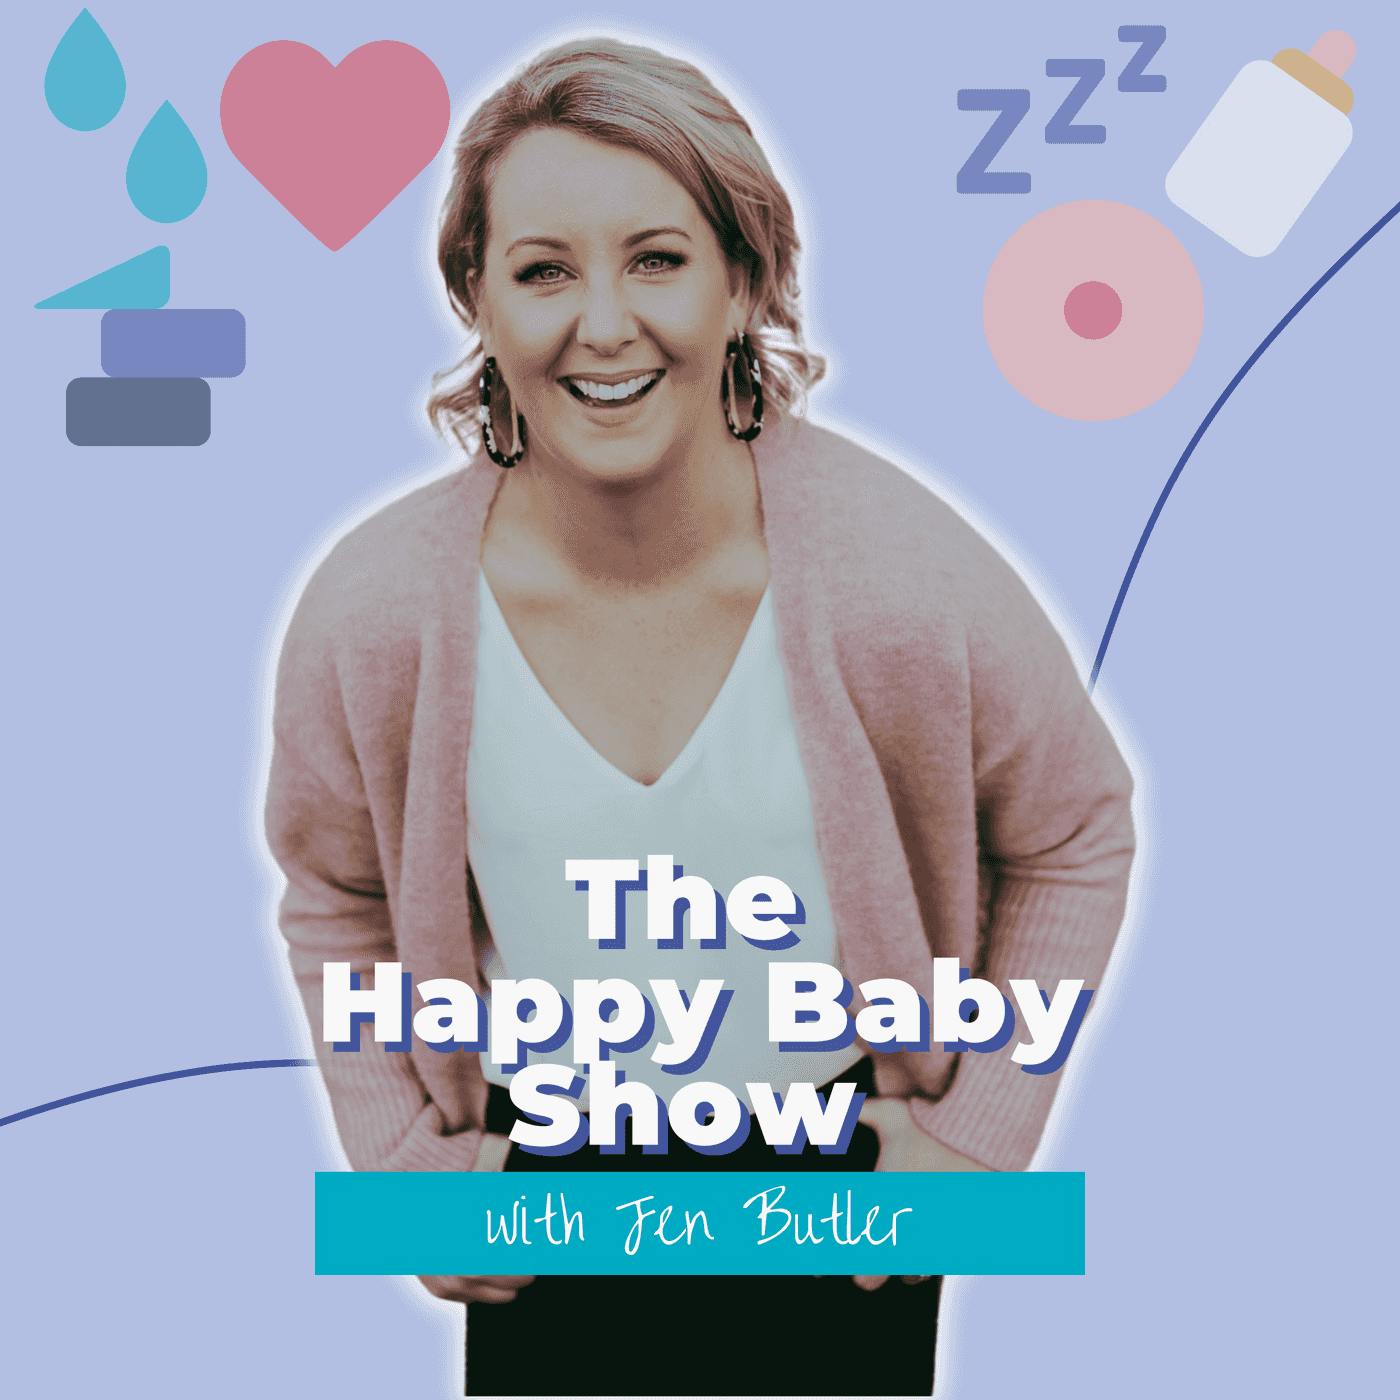 10. Mum Talk | How do I know if and when I am ready to have another baby?